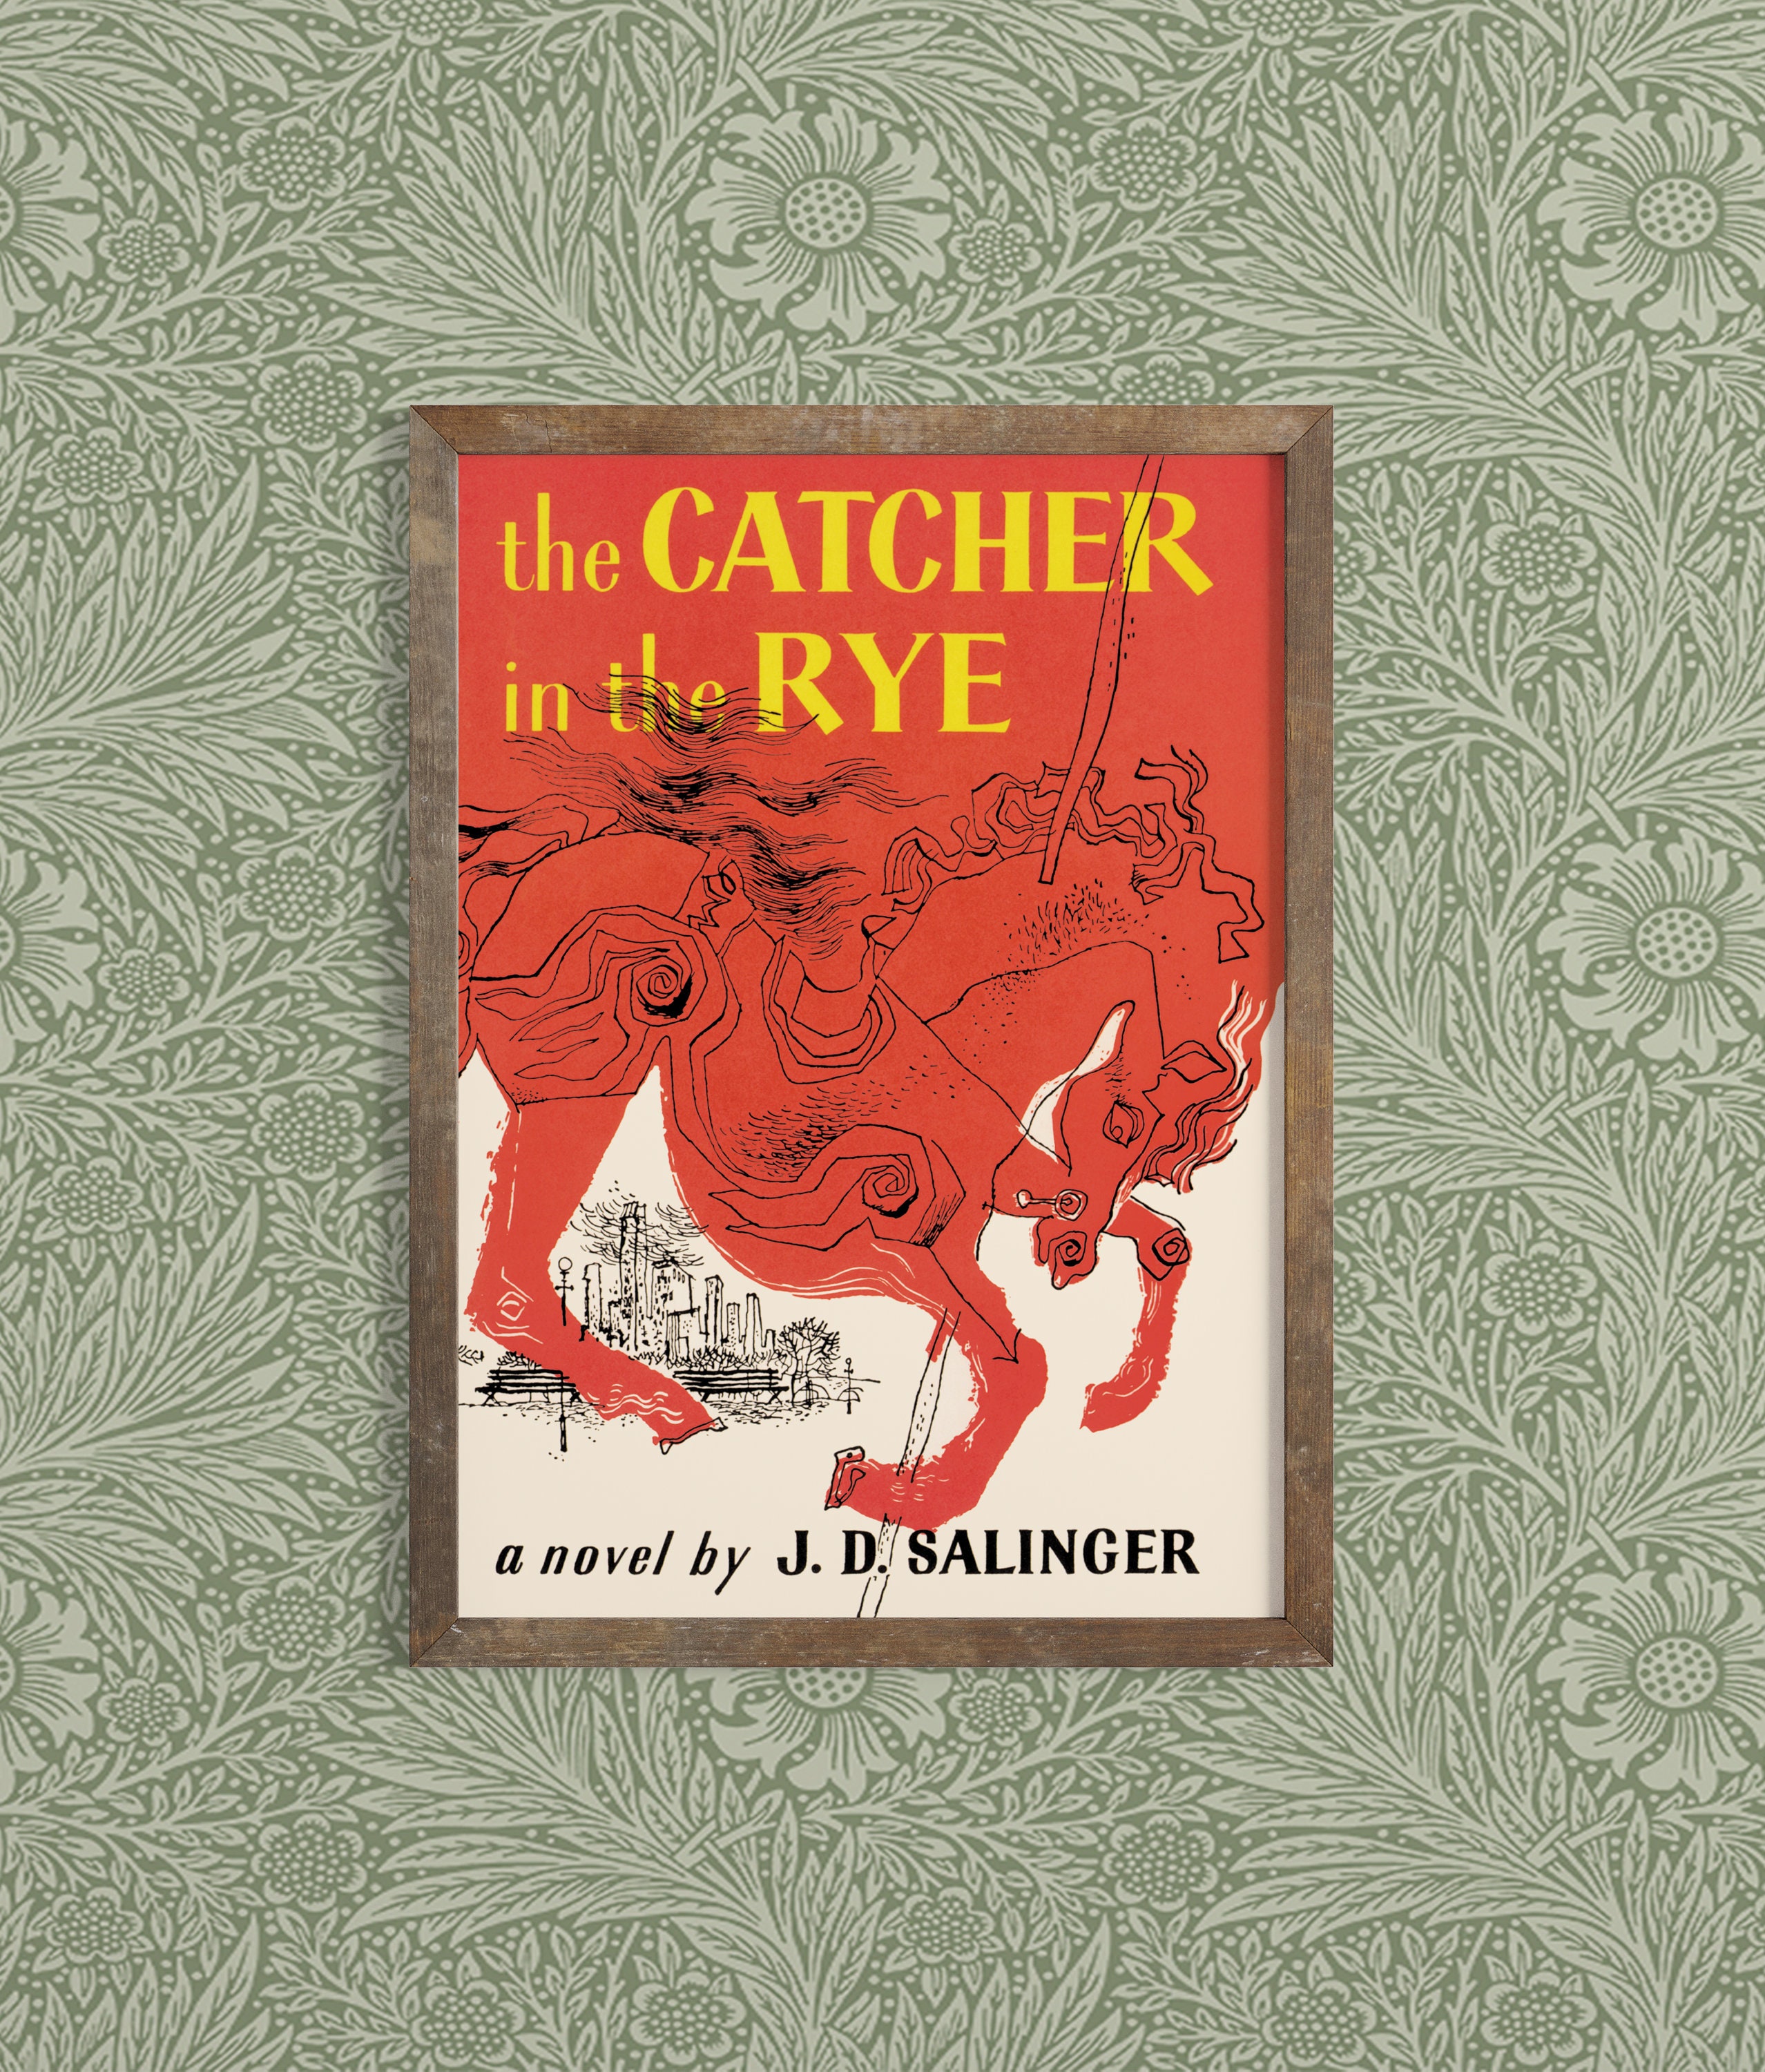 The Catcher in the Rye by J.D. Salinger (Bay Back Books centennial edition)  - Fonts In Use